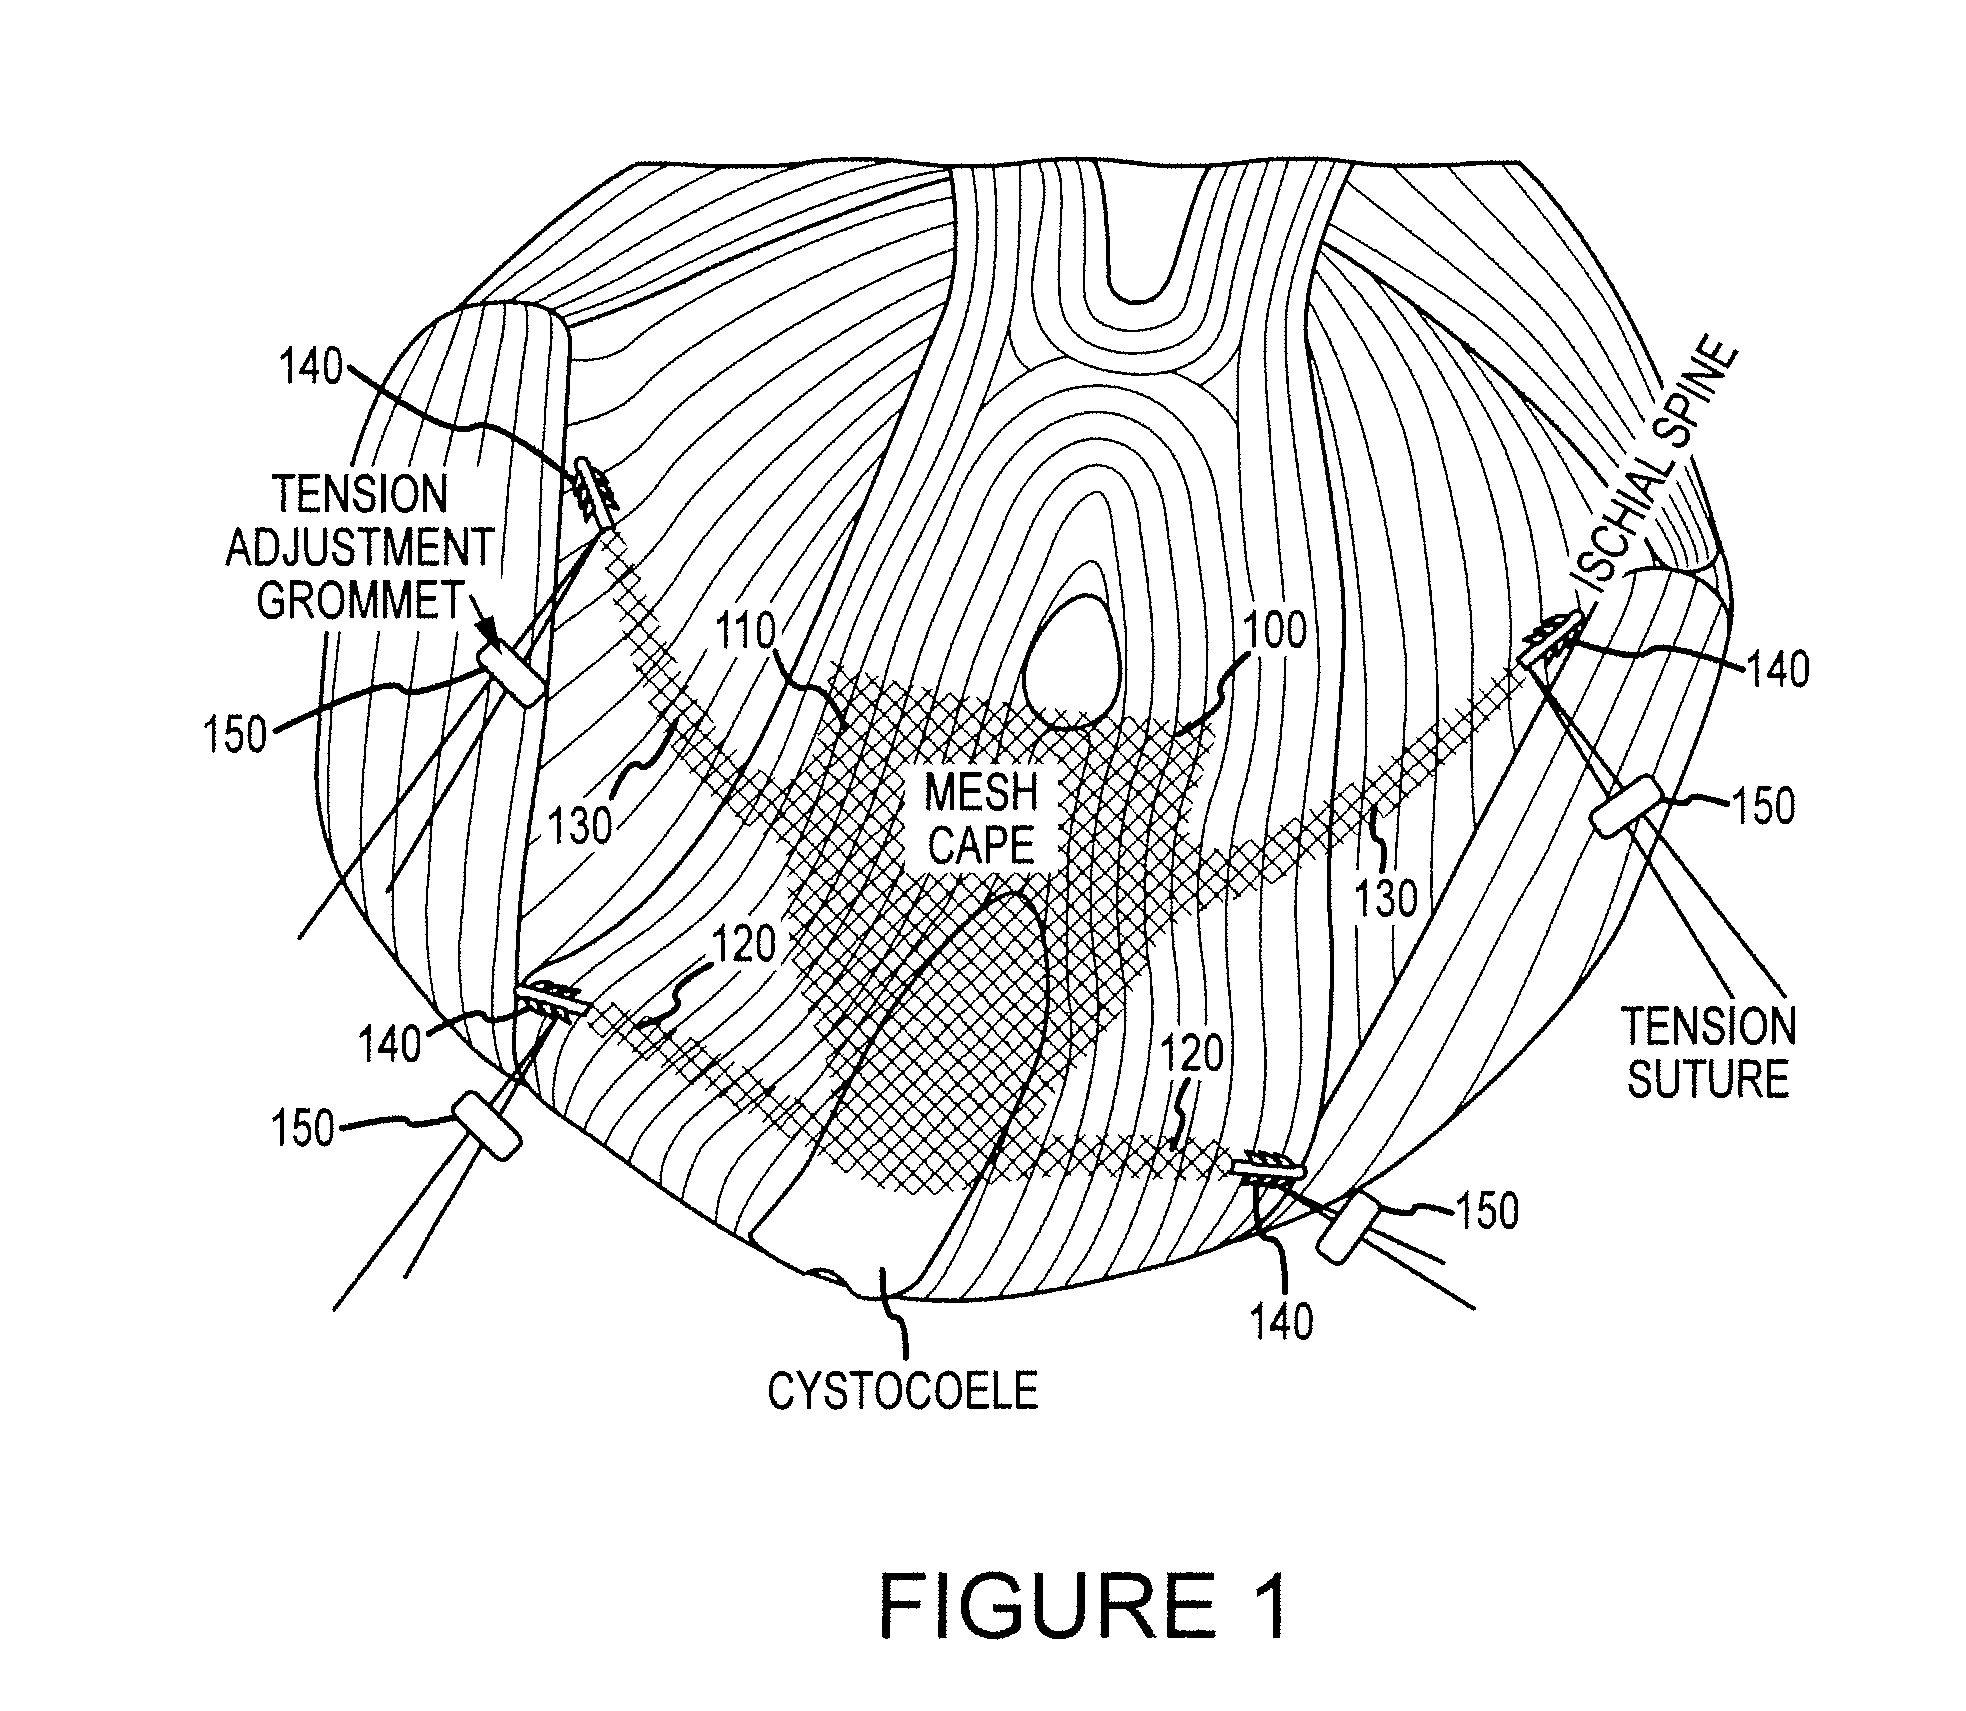 Systems and methods for treating anterior pelvic organ prolapse